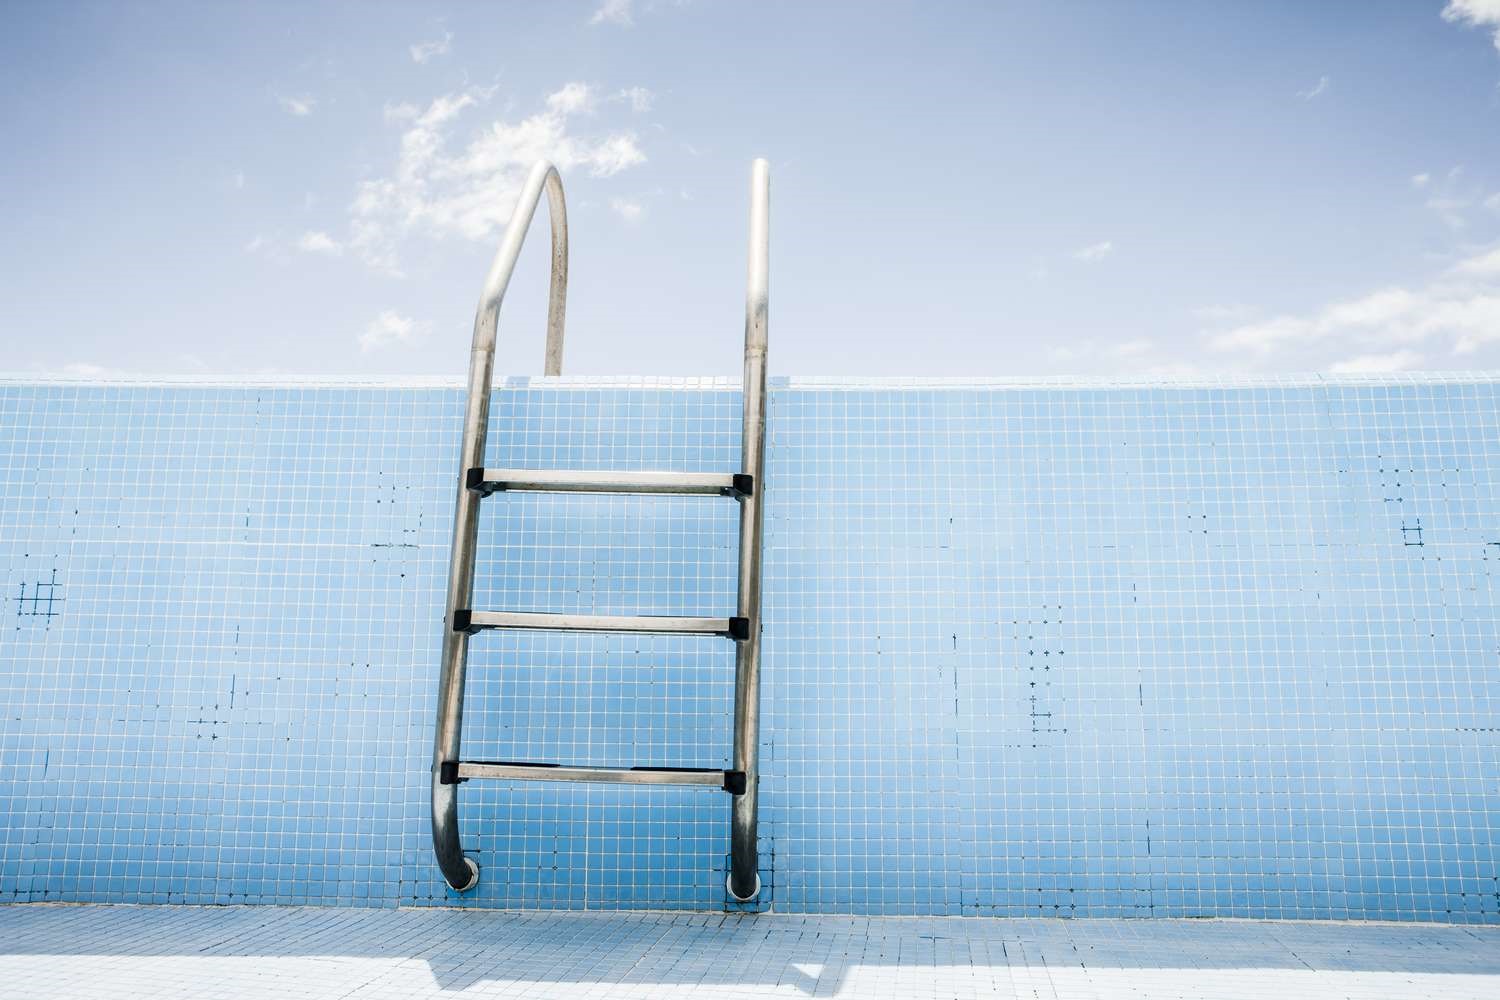 How To Clean The Pool Ladder